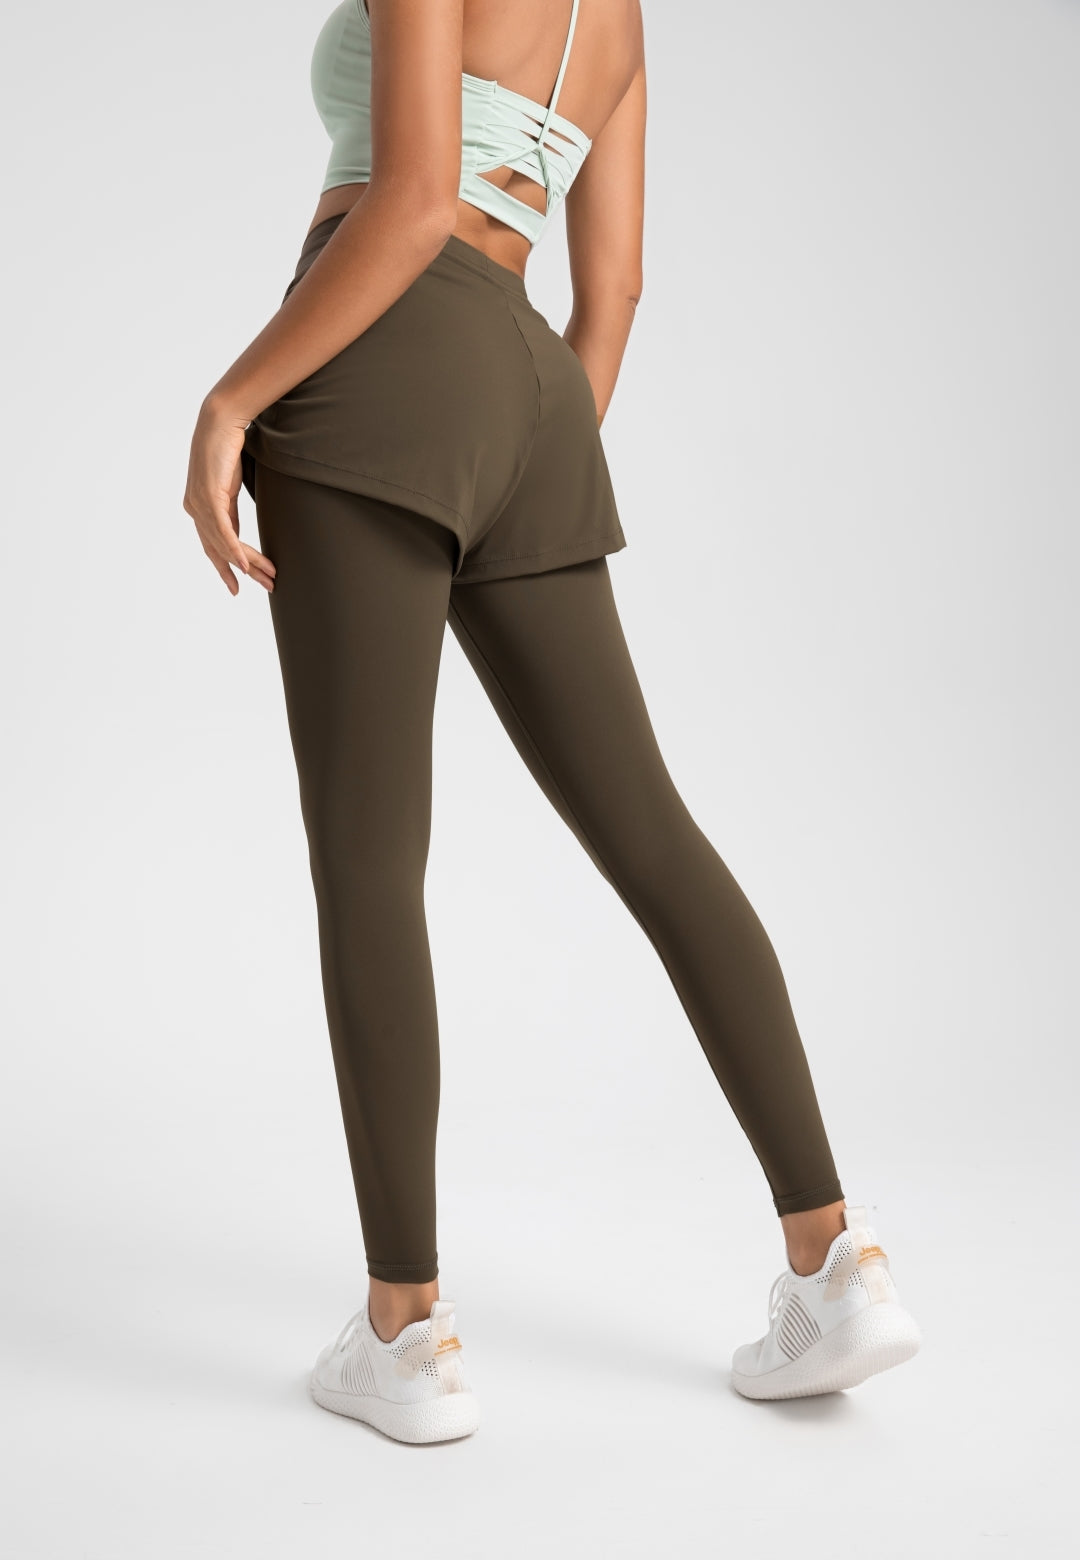 Solid Color Layered Leggings